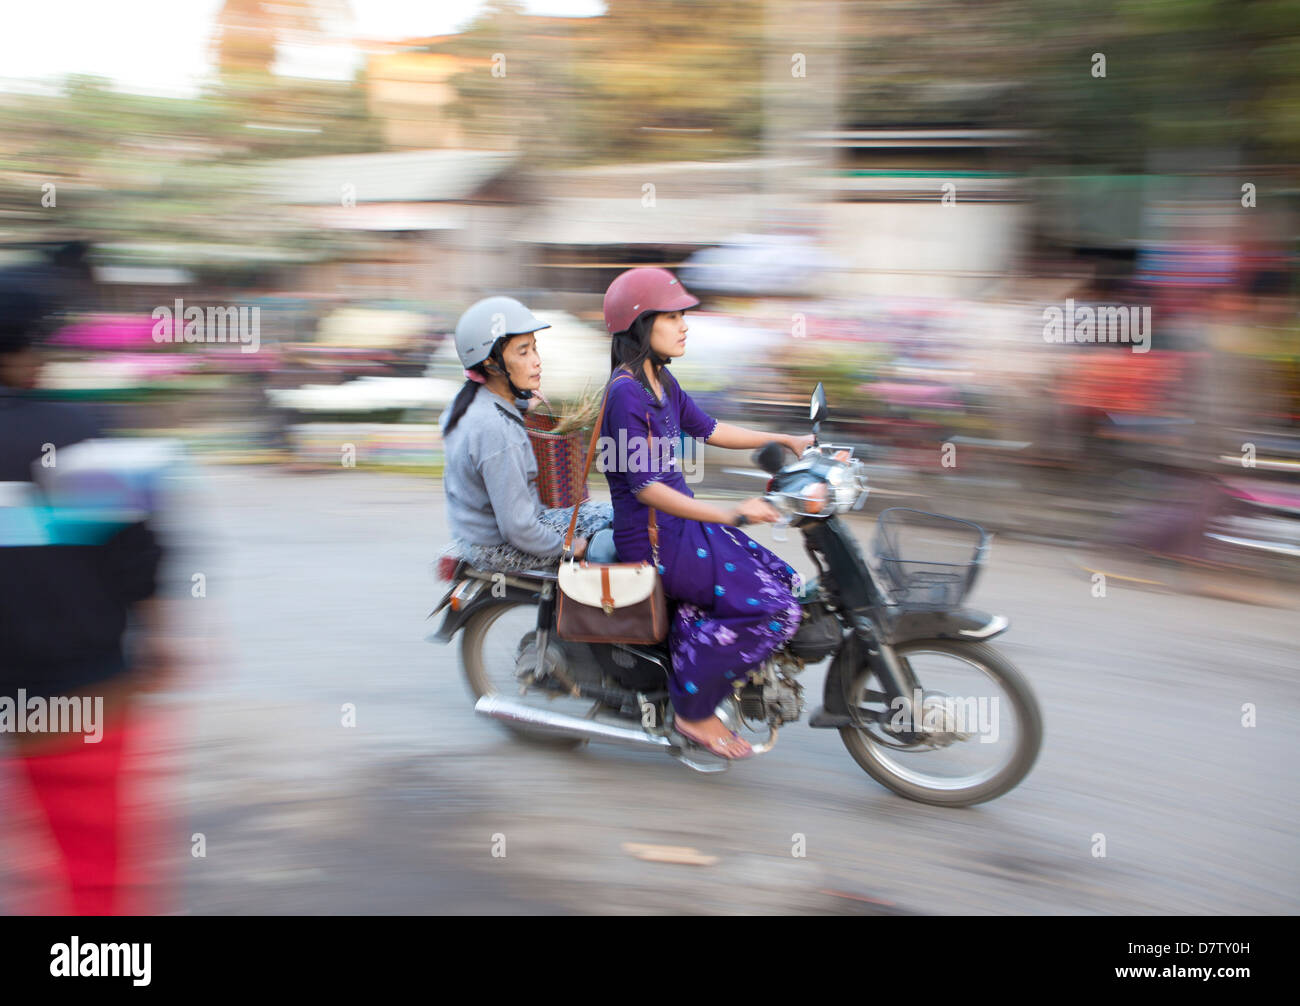 Panned and blurred shot, creating a sense of movement, of two women riding moped through a market, Mandalay, Burma Stock Photo